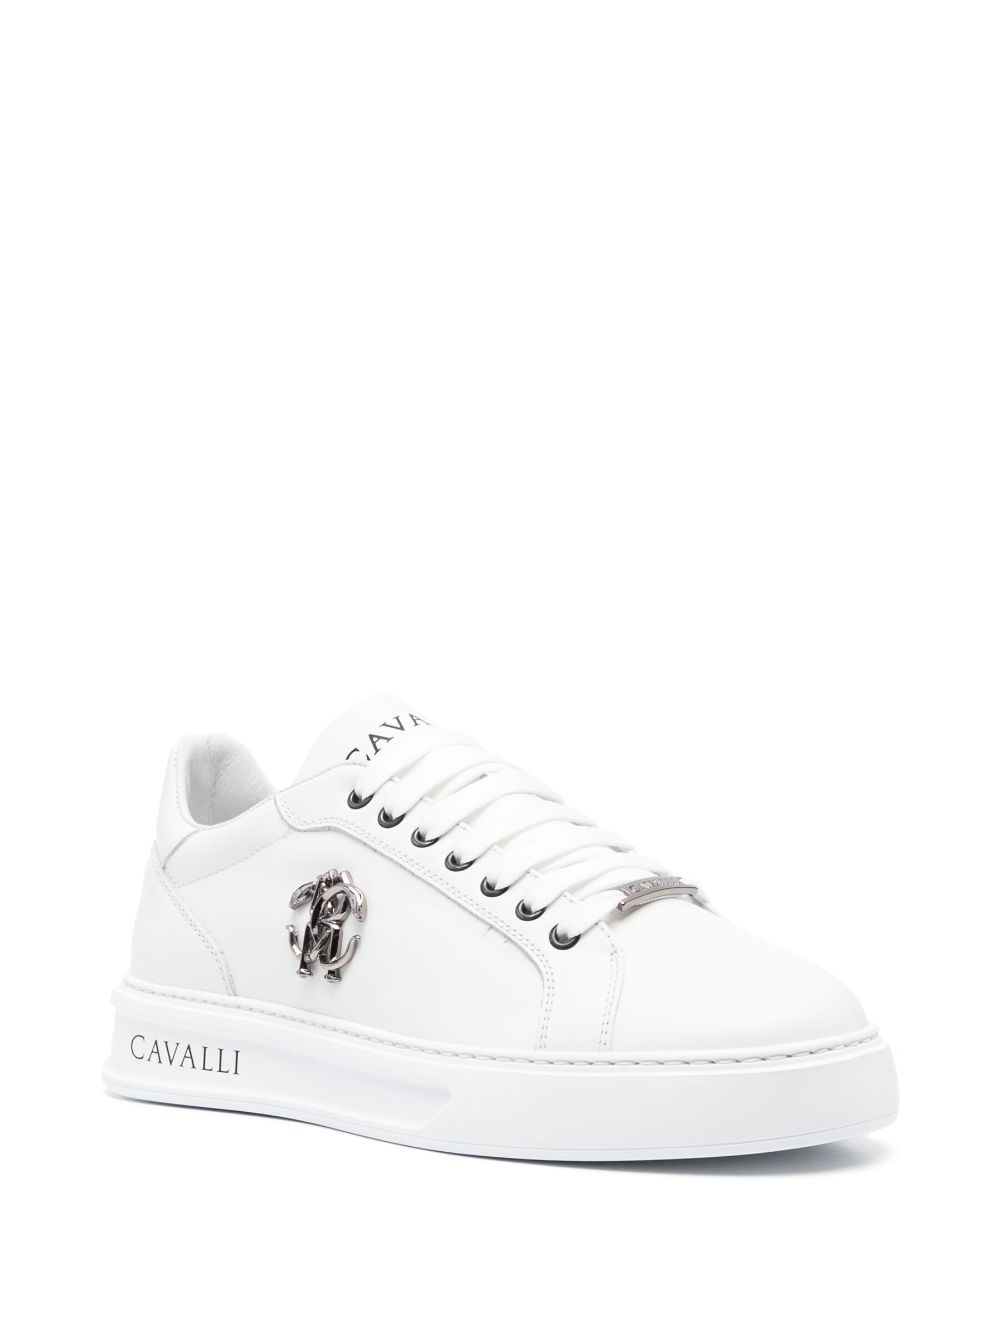 Roberto Cavalli lace-up low-top Sneakers - Farfetch